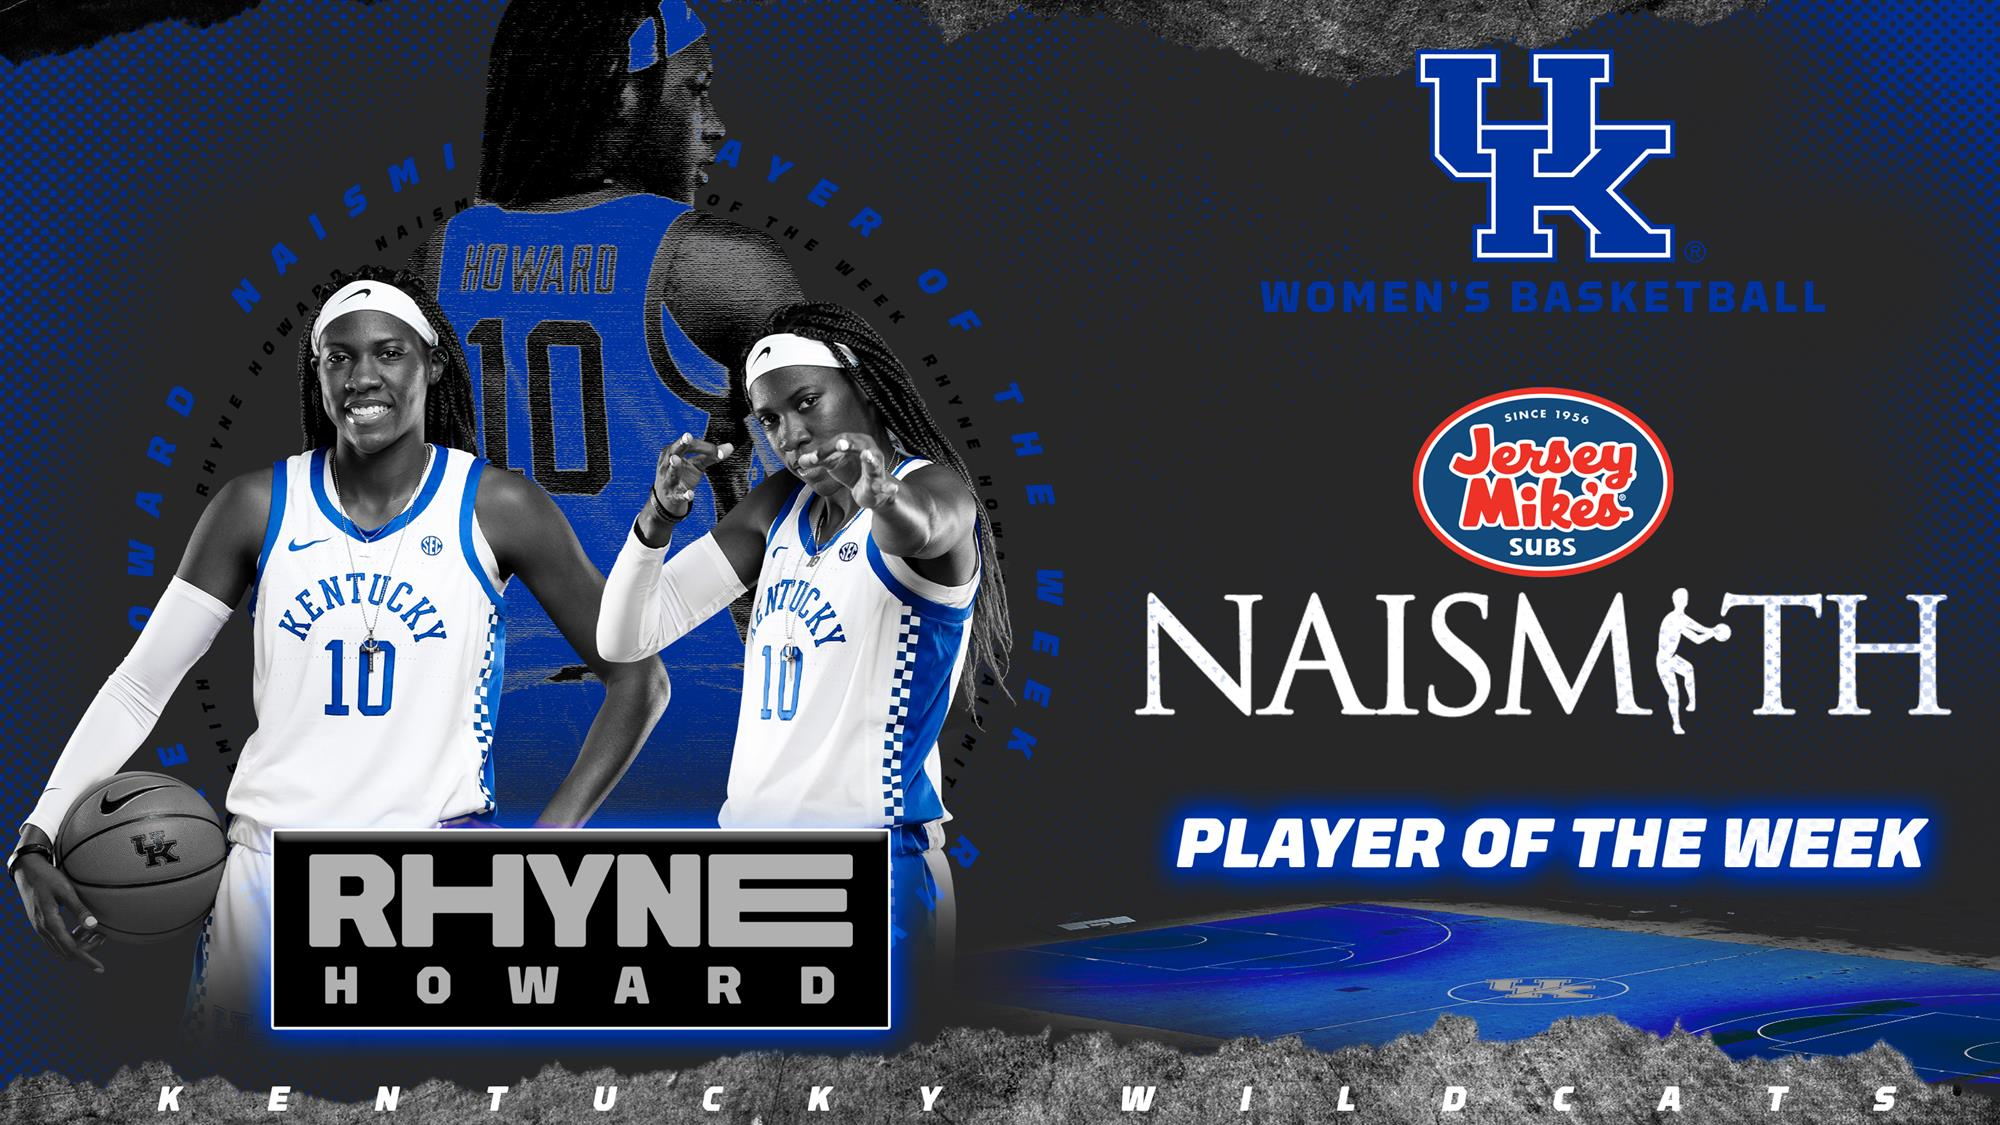 Rhyne Howard Named Naismith Trophy Player of the Week